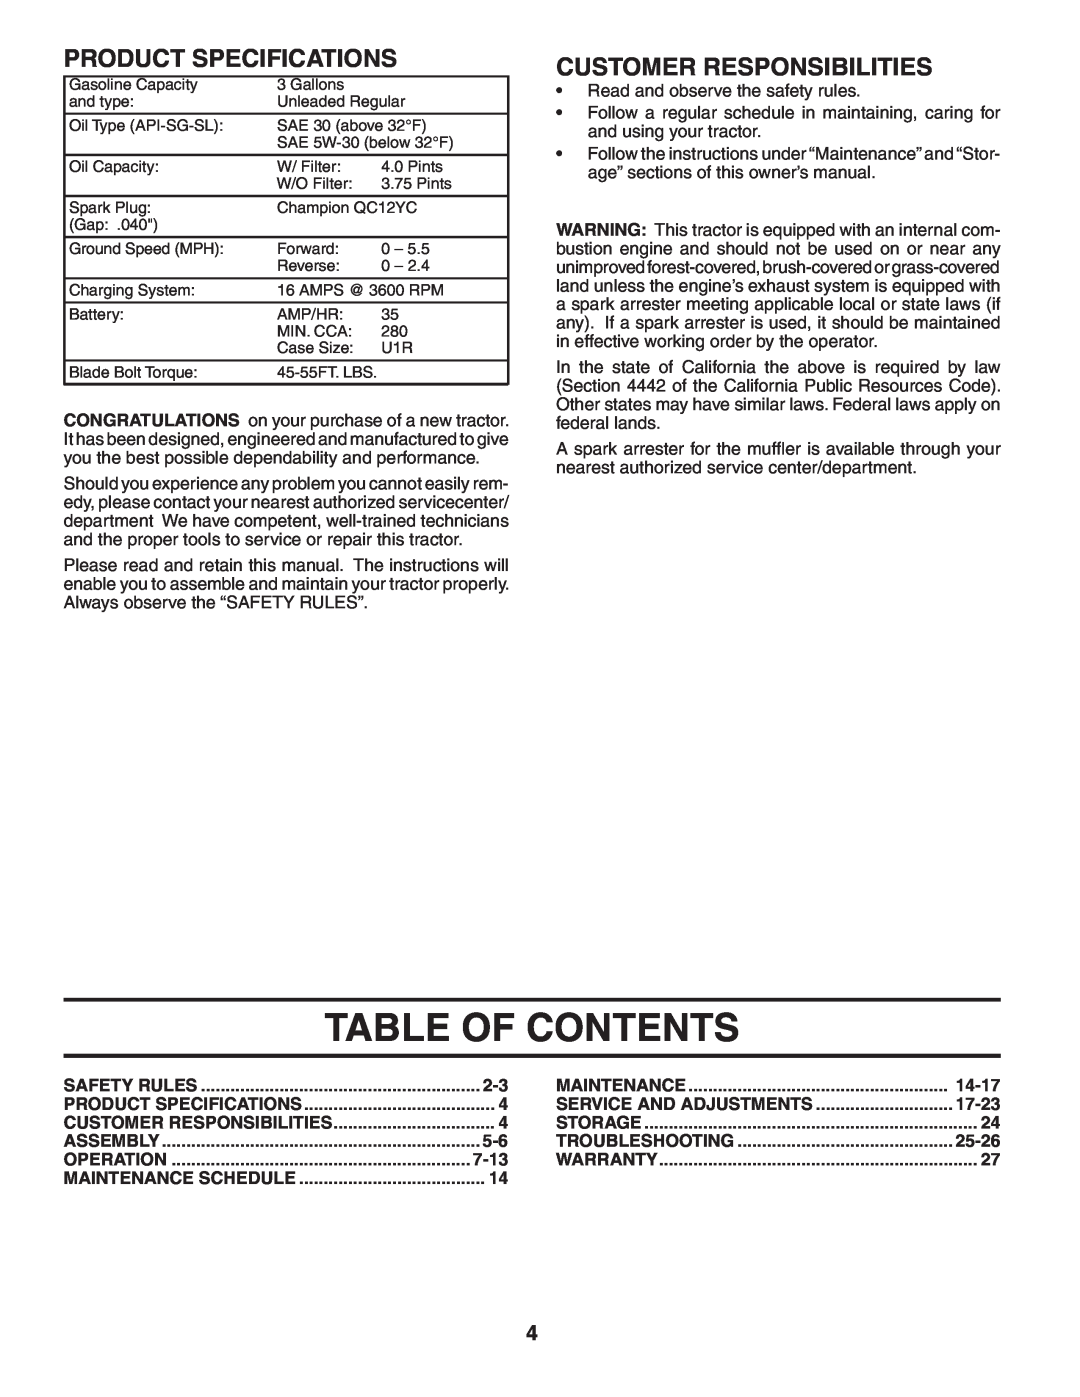 Poulan PB22H48YT manual Table Of Contents, Product Specifications, Customer Responsibilities, 7-13, 14-17, 17-23, 25-26 